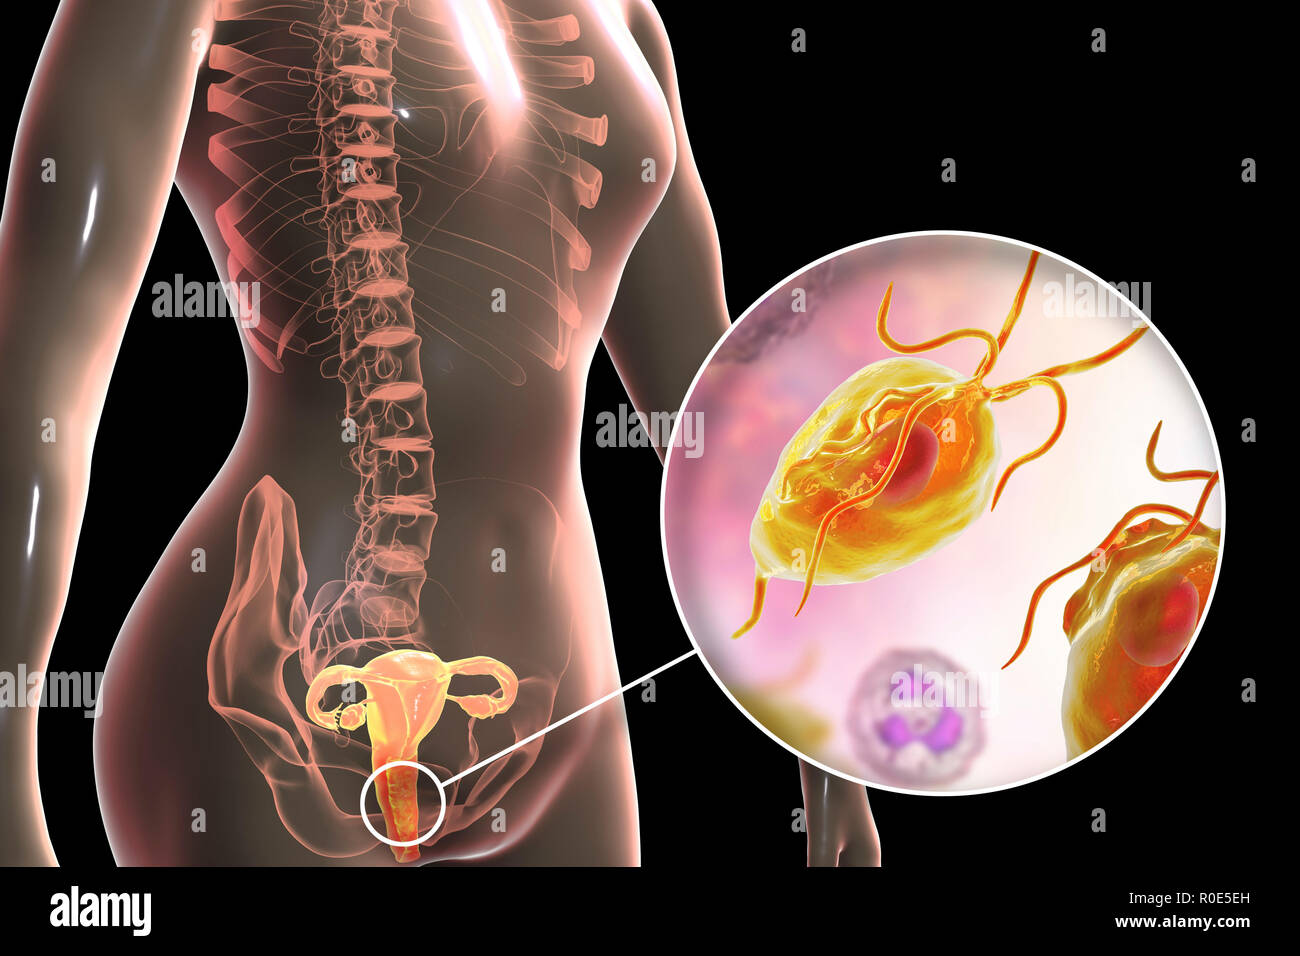 Trichomoniasis, illustration. Computer illustration of the female reproductive system and the parasitic microorganism Trichomonas vaginalis, which is the causative agent of trichomoniasis. Trichomoniasis is a common cause of vaginitis and is a sexually transmitted disease. Stock Photo